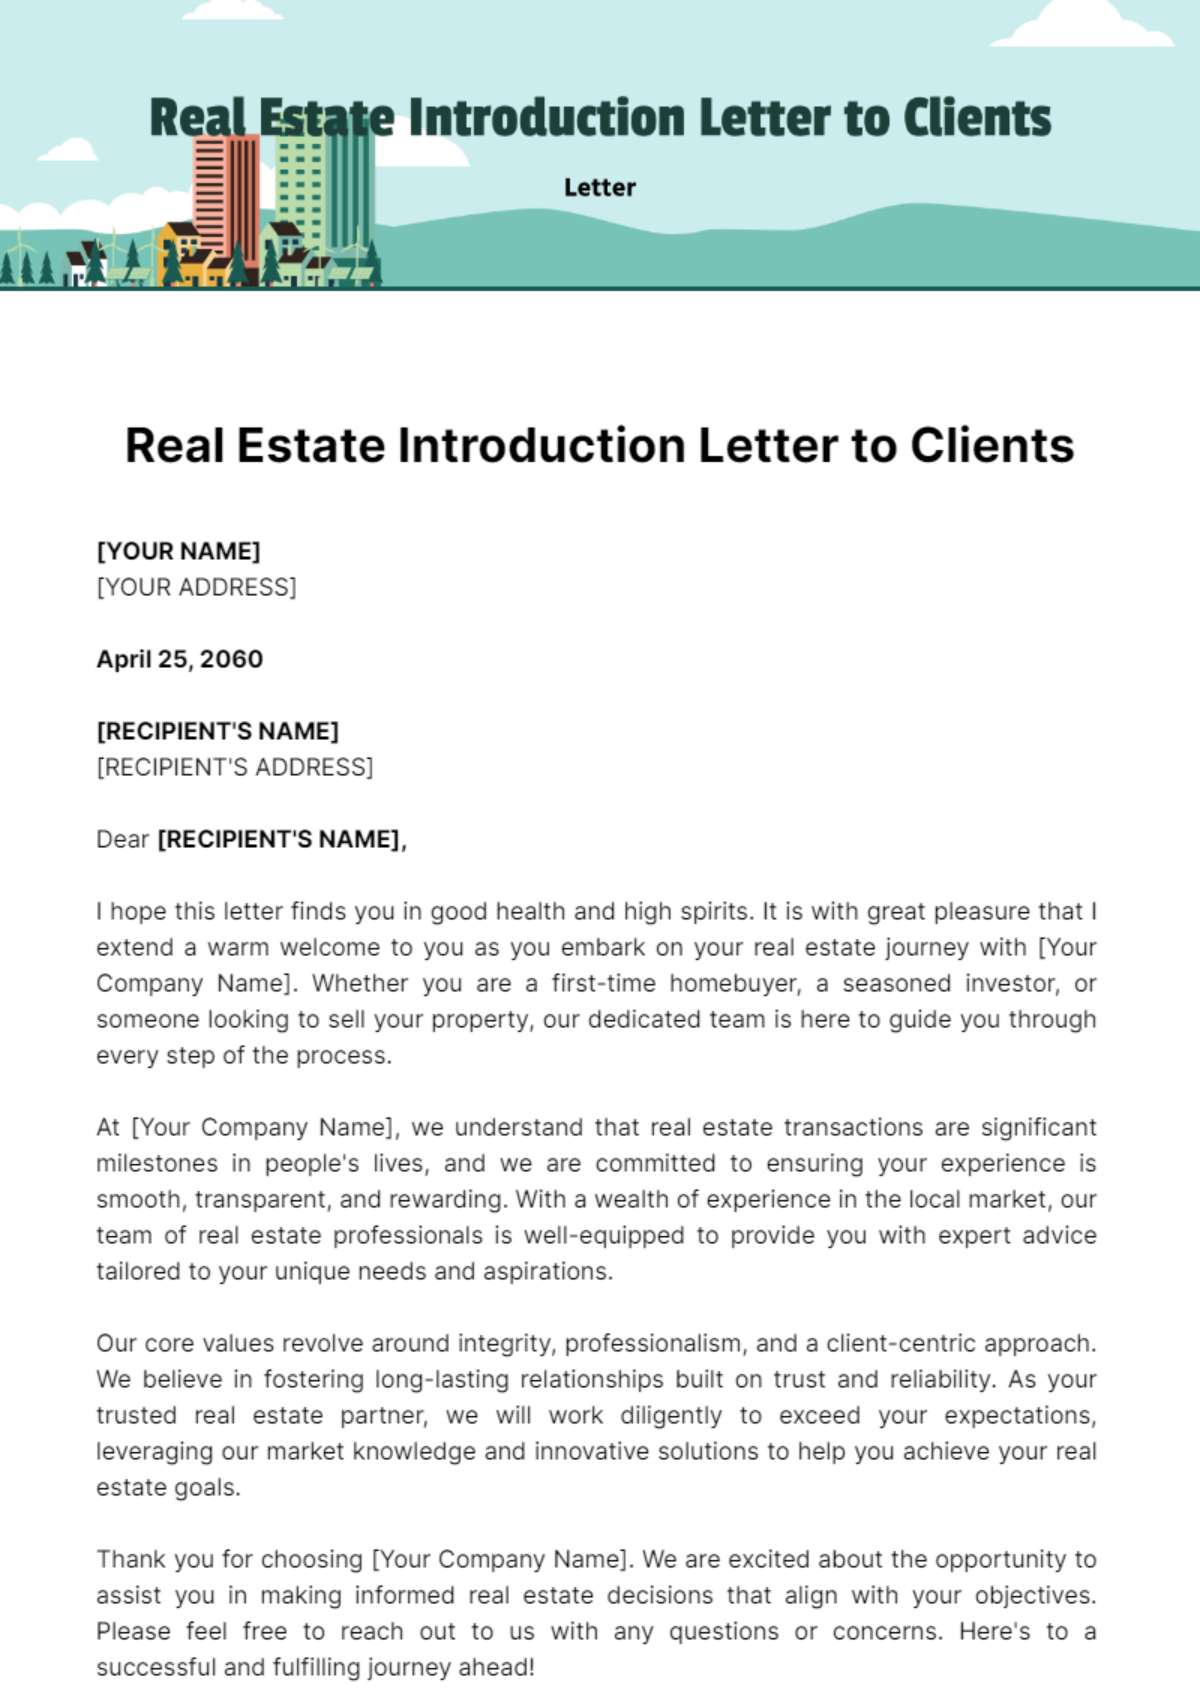 Free Real Estate Introduction Letter to Clients Template